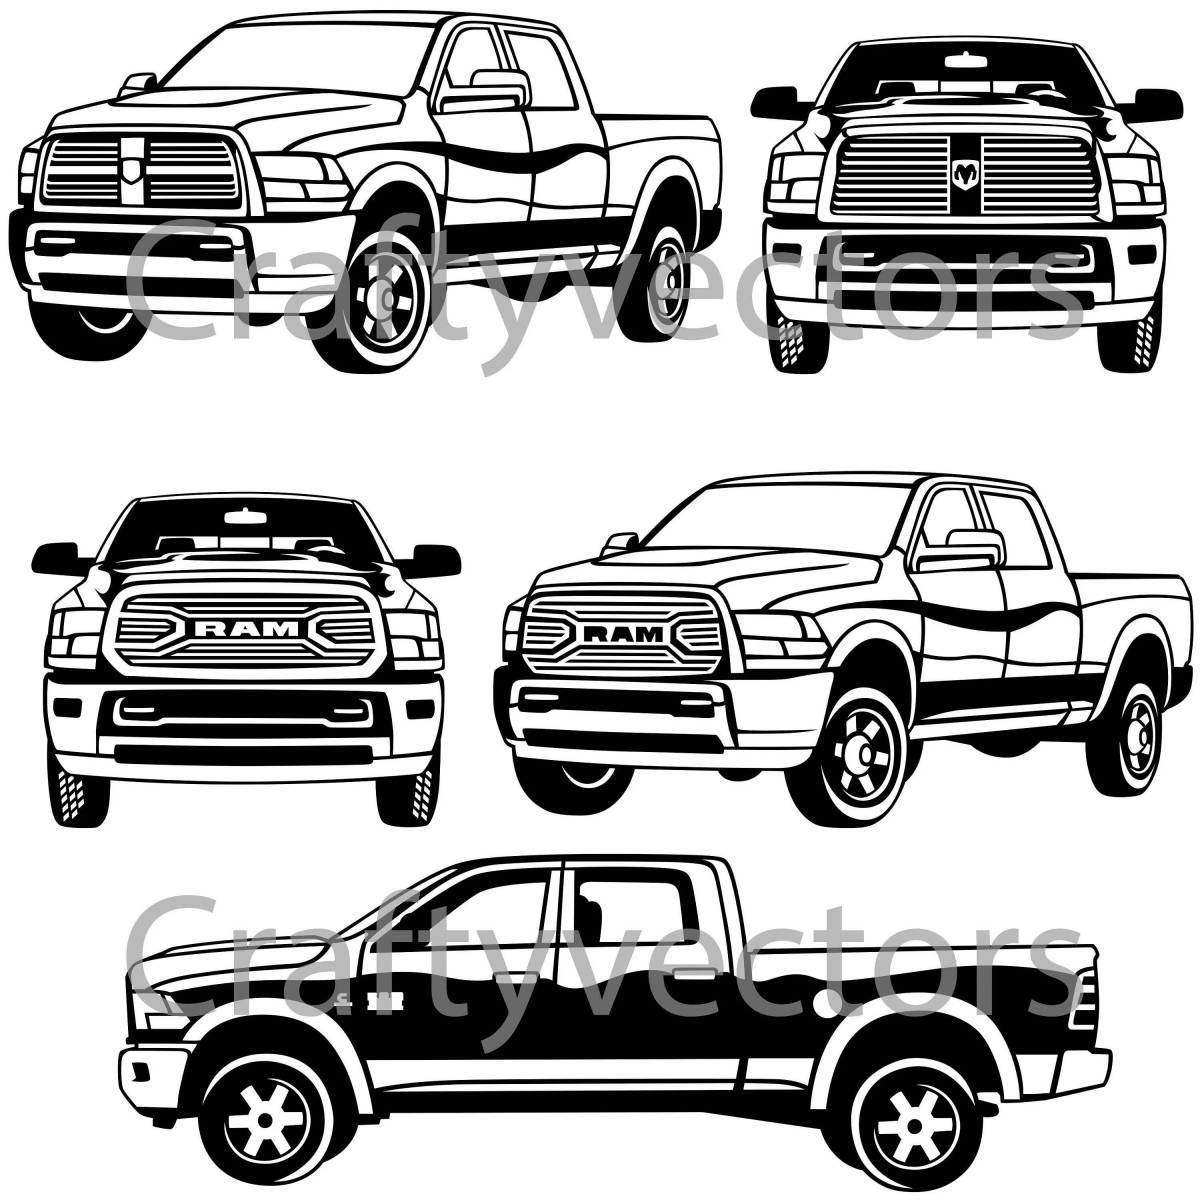 Dodge ram bright coloring page